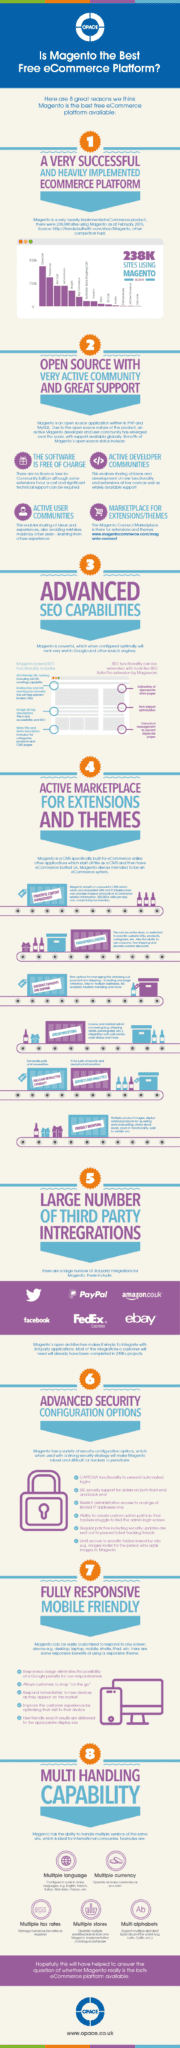 Infographic to look at whether Magento is the best free ecommerce platform